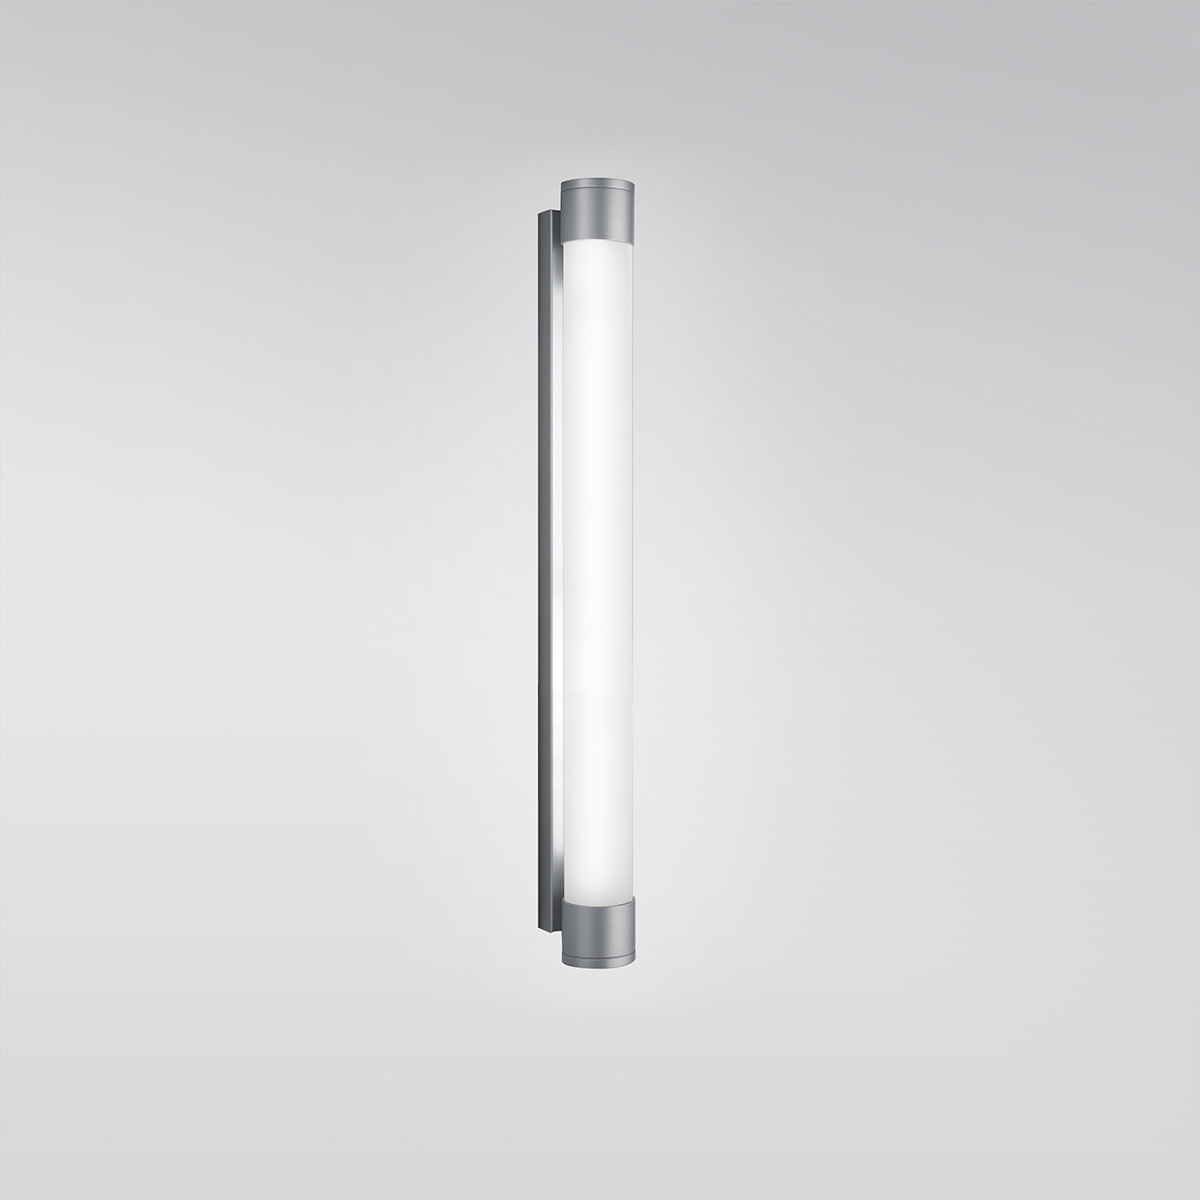 A luminous wall sconce in a thin tube shape with metal caps on each end